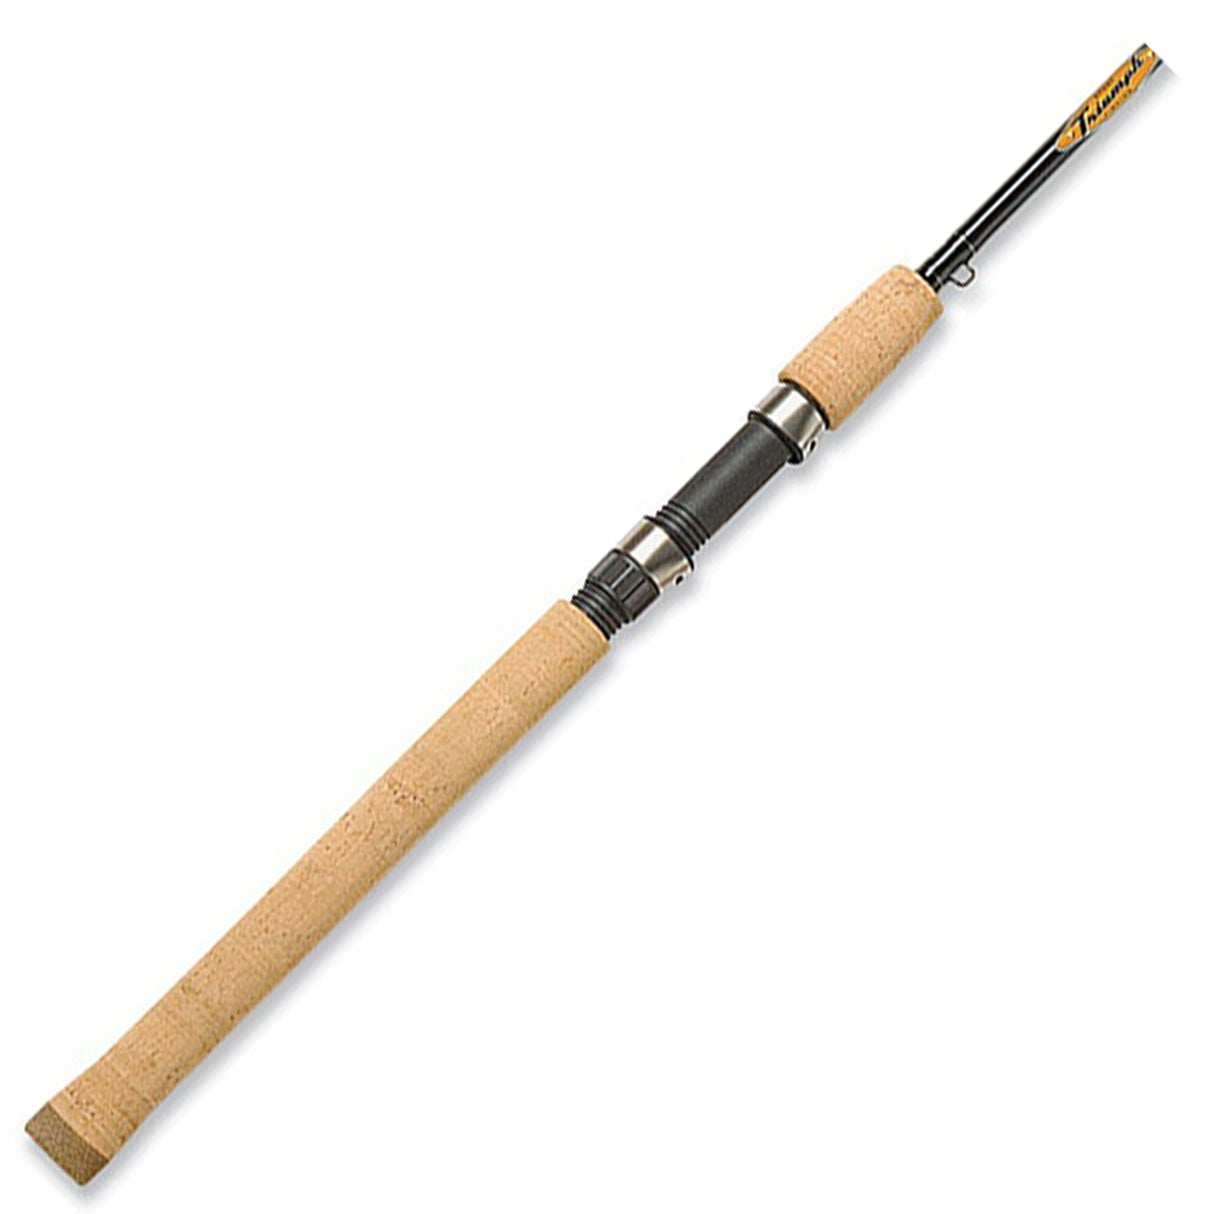 ST CROIX TRIUMPH FRESHWATER SPINNING ROD